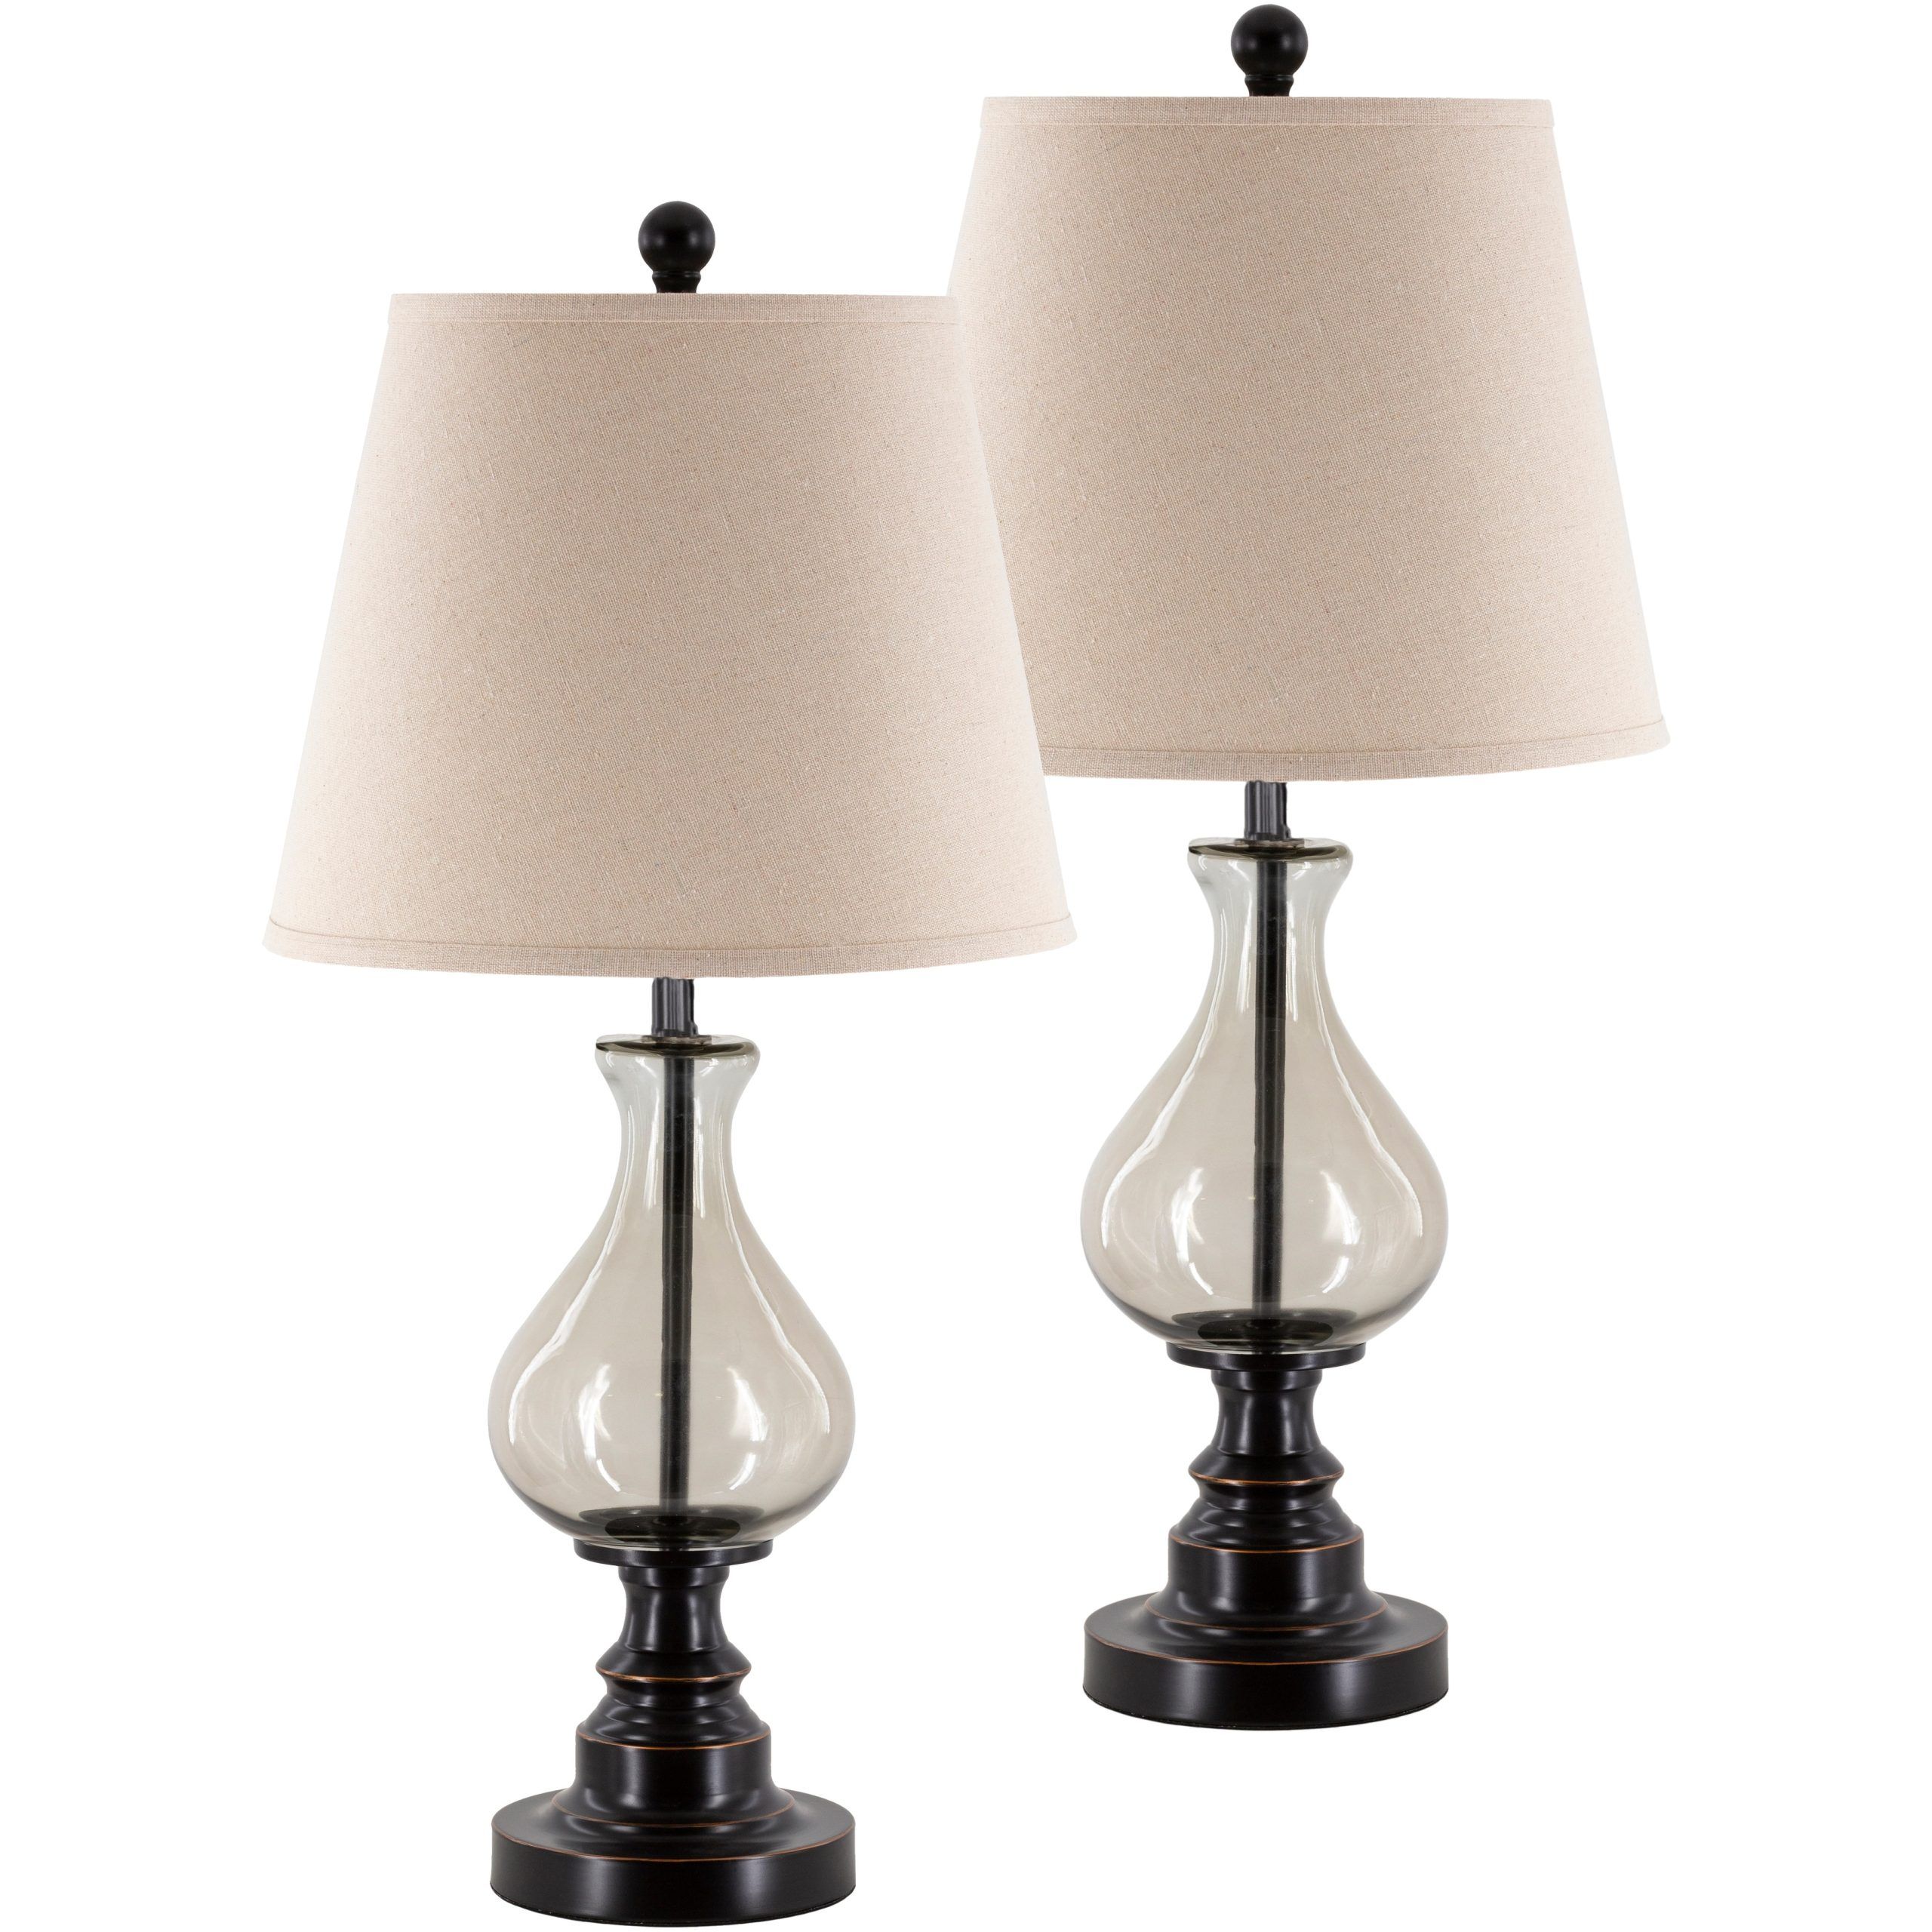 2020 Morty Traditional Glass 26.75 Inch Table Lamps (set Of 2) –  (View 9 of 15)